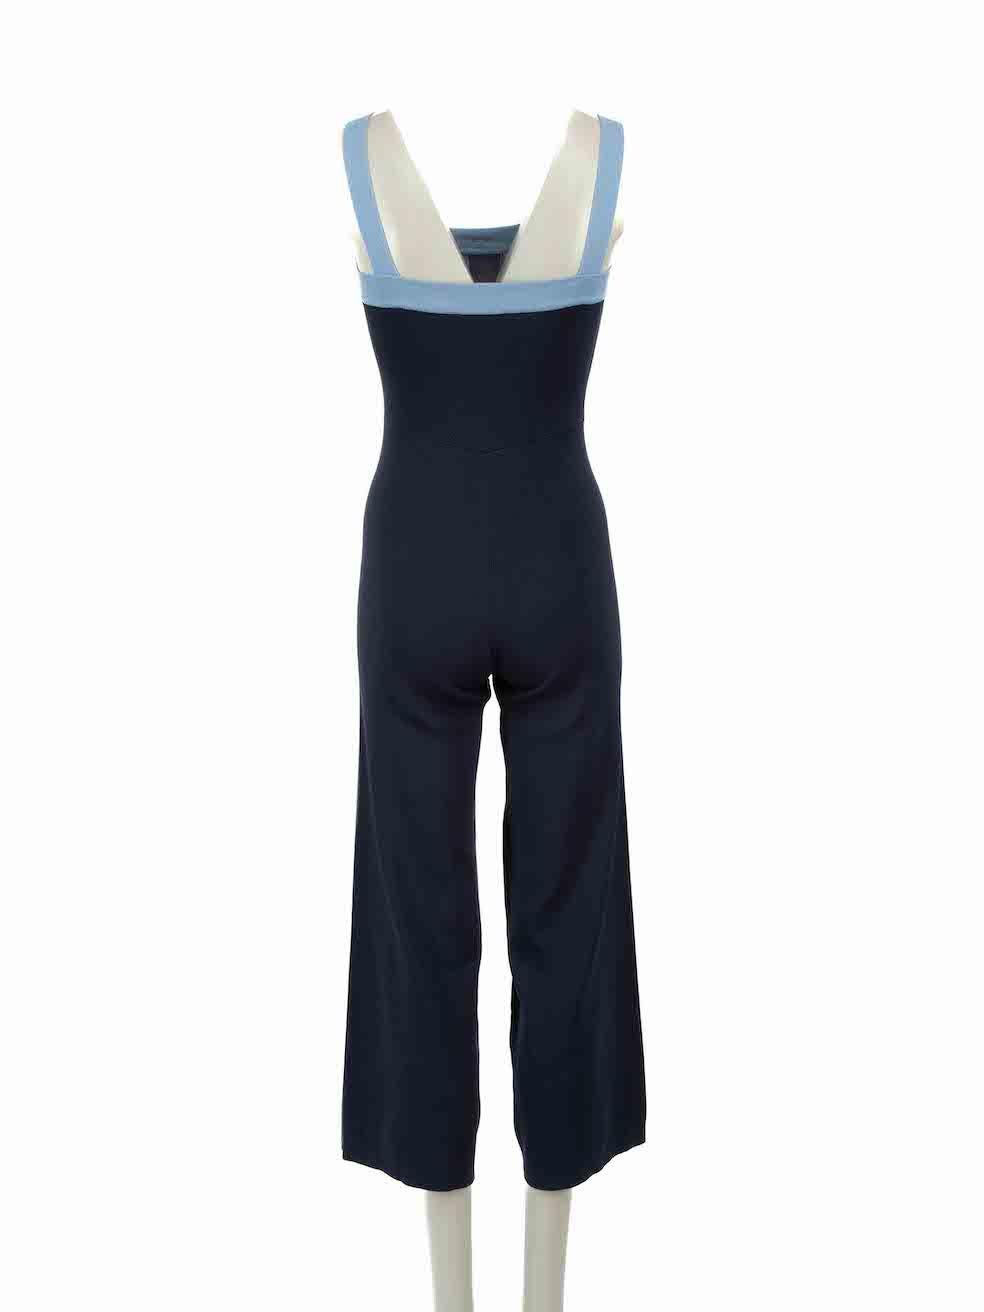 Black STAUD Blue Knitted Sleeveless Jumpsuit Size S